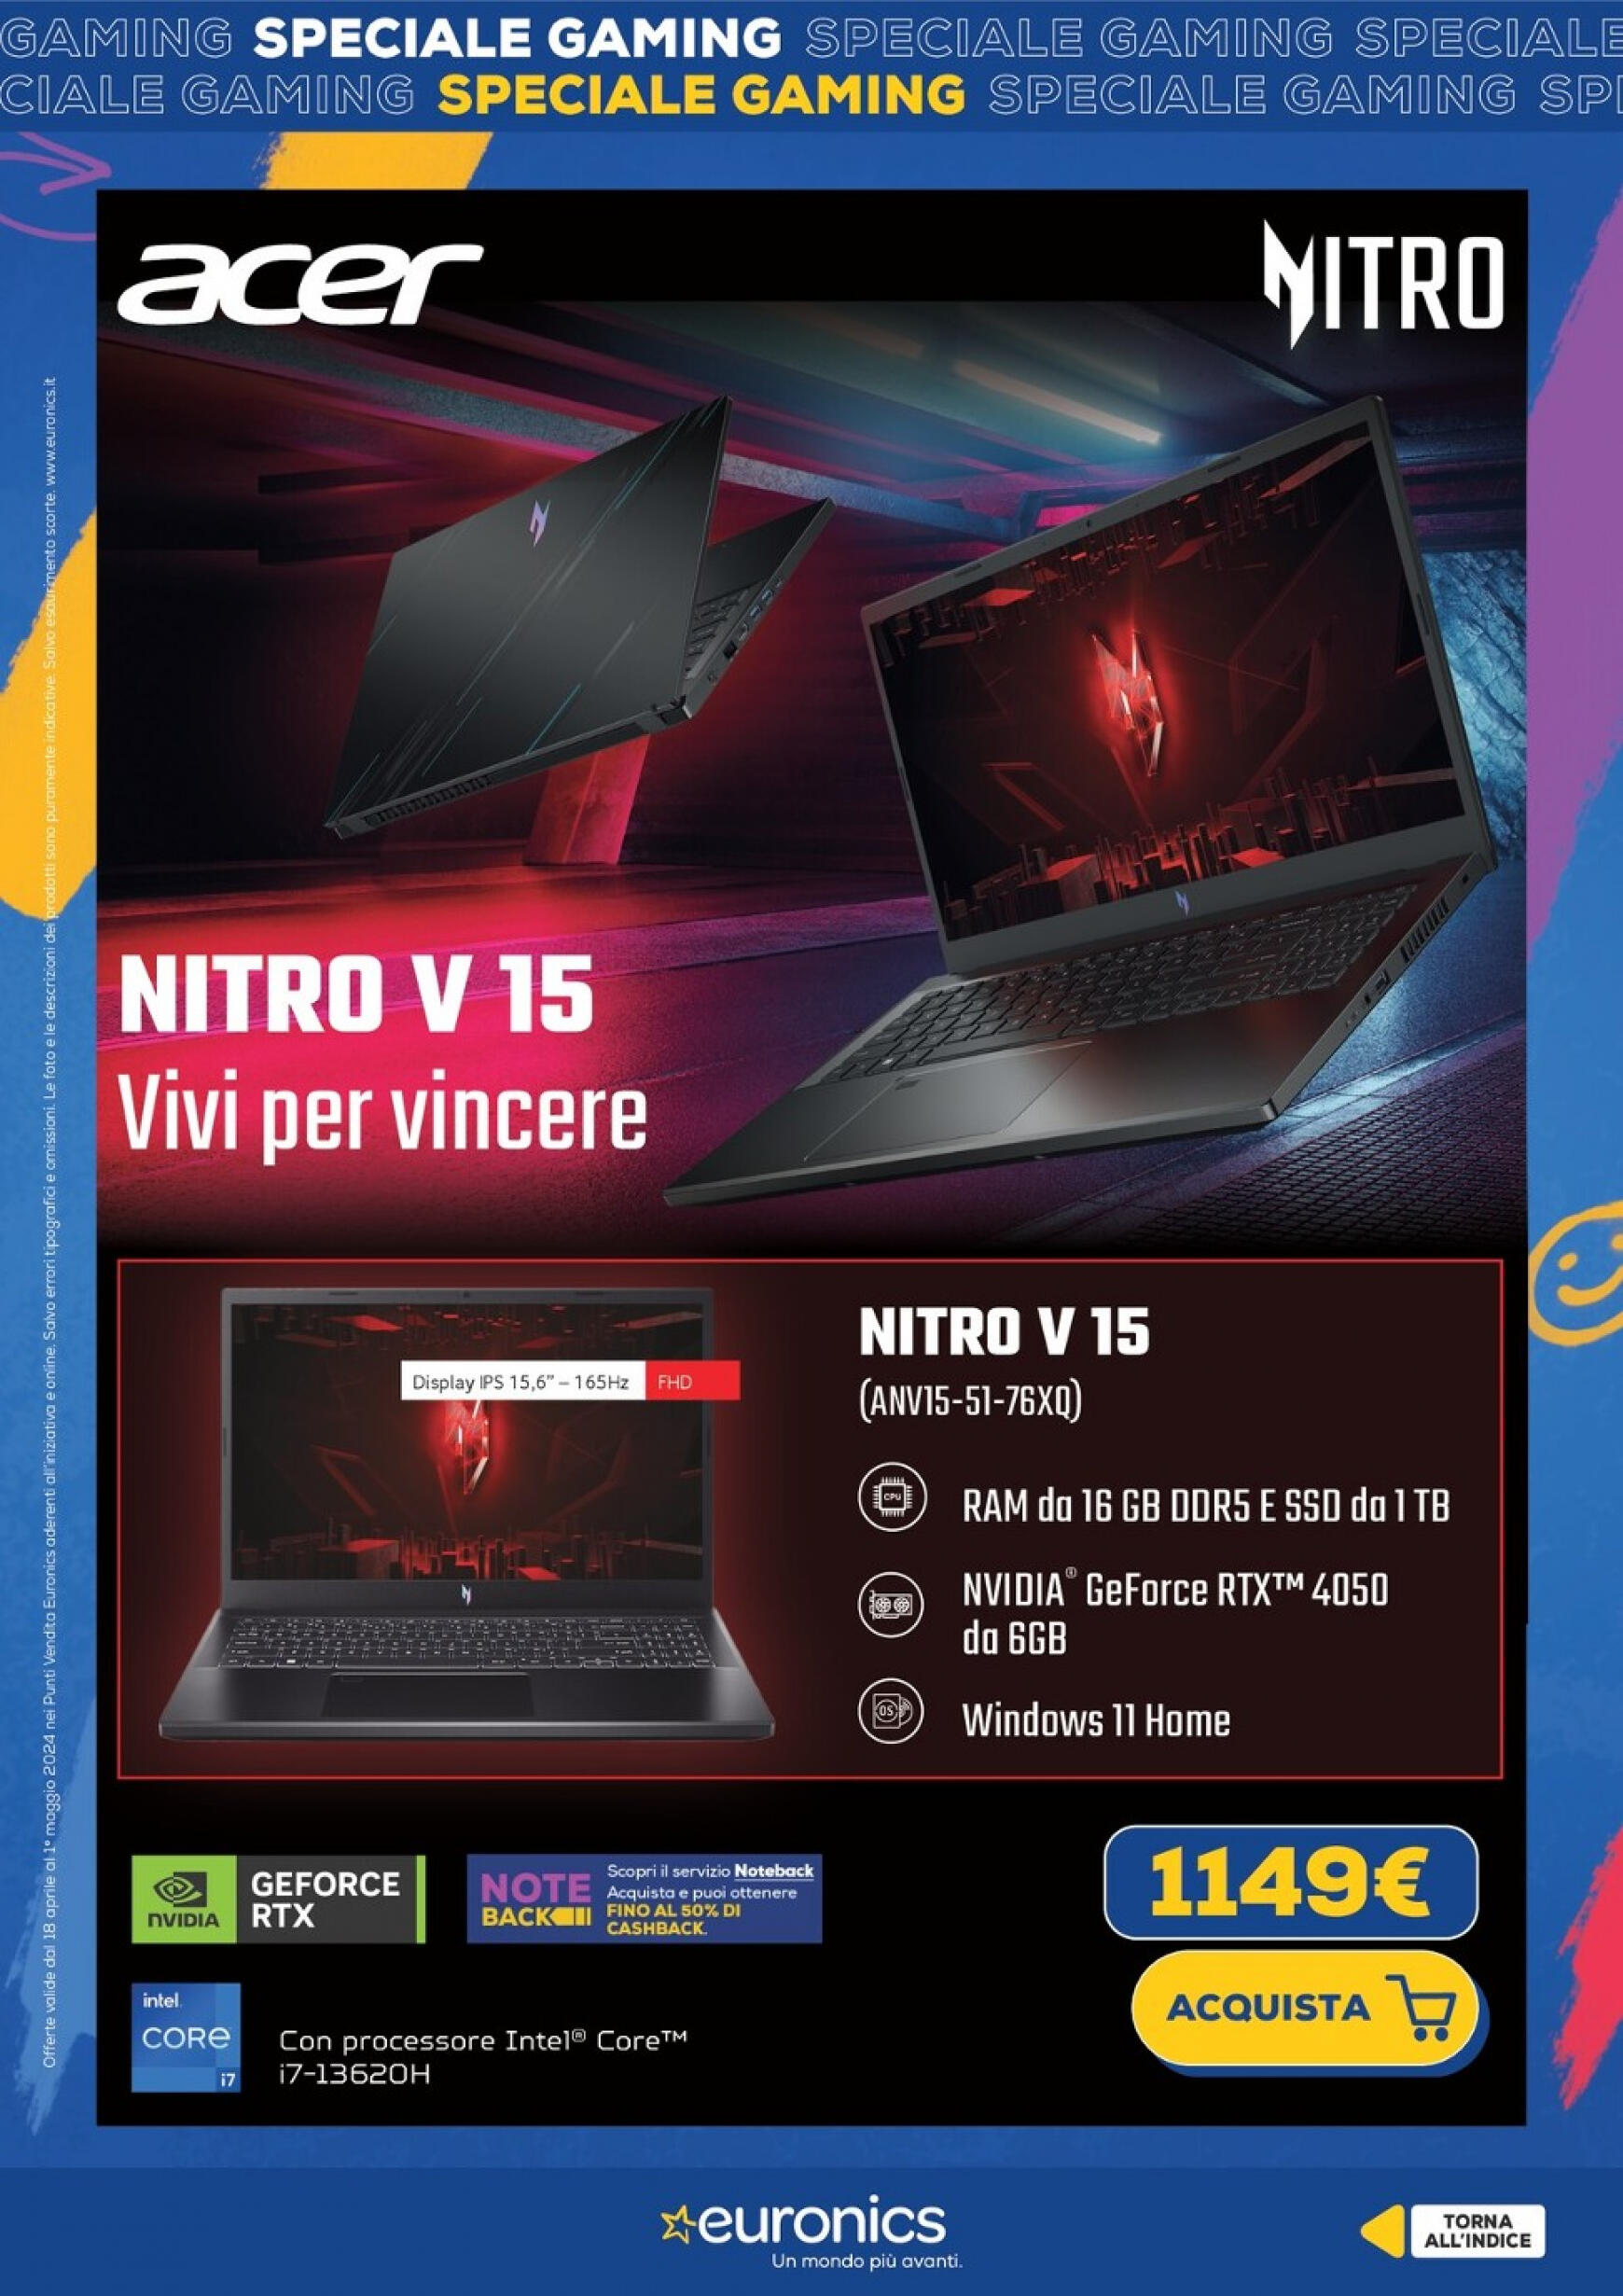 euronics - Nuovo volantino Euronics - Speciale Gaming 18.04. - 01.05. - page: 4